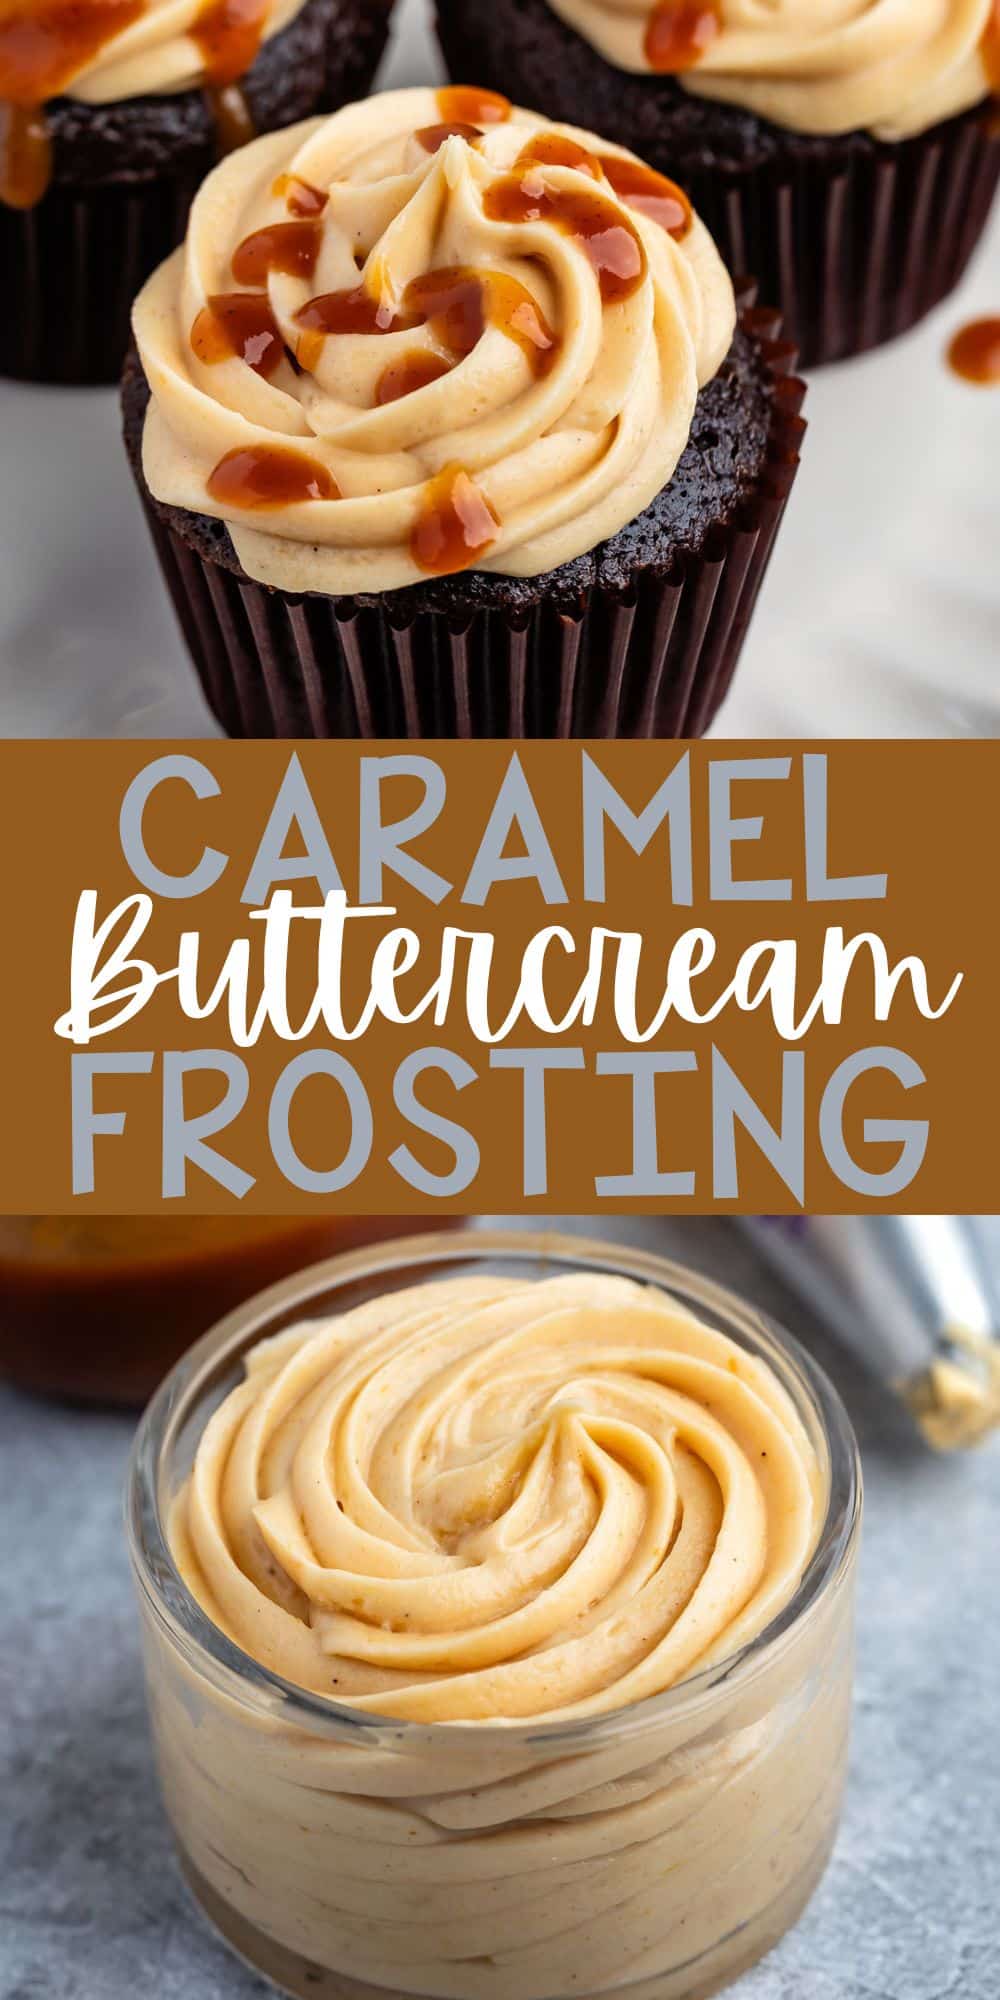 two photos of brown cupcake with caramel frosting on top with words on the image.